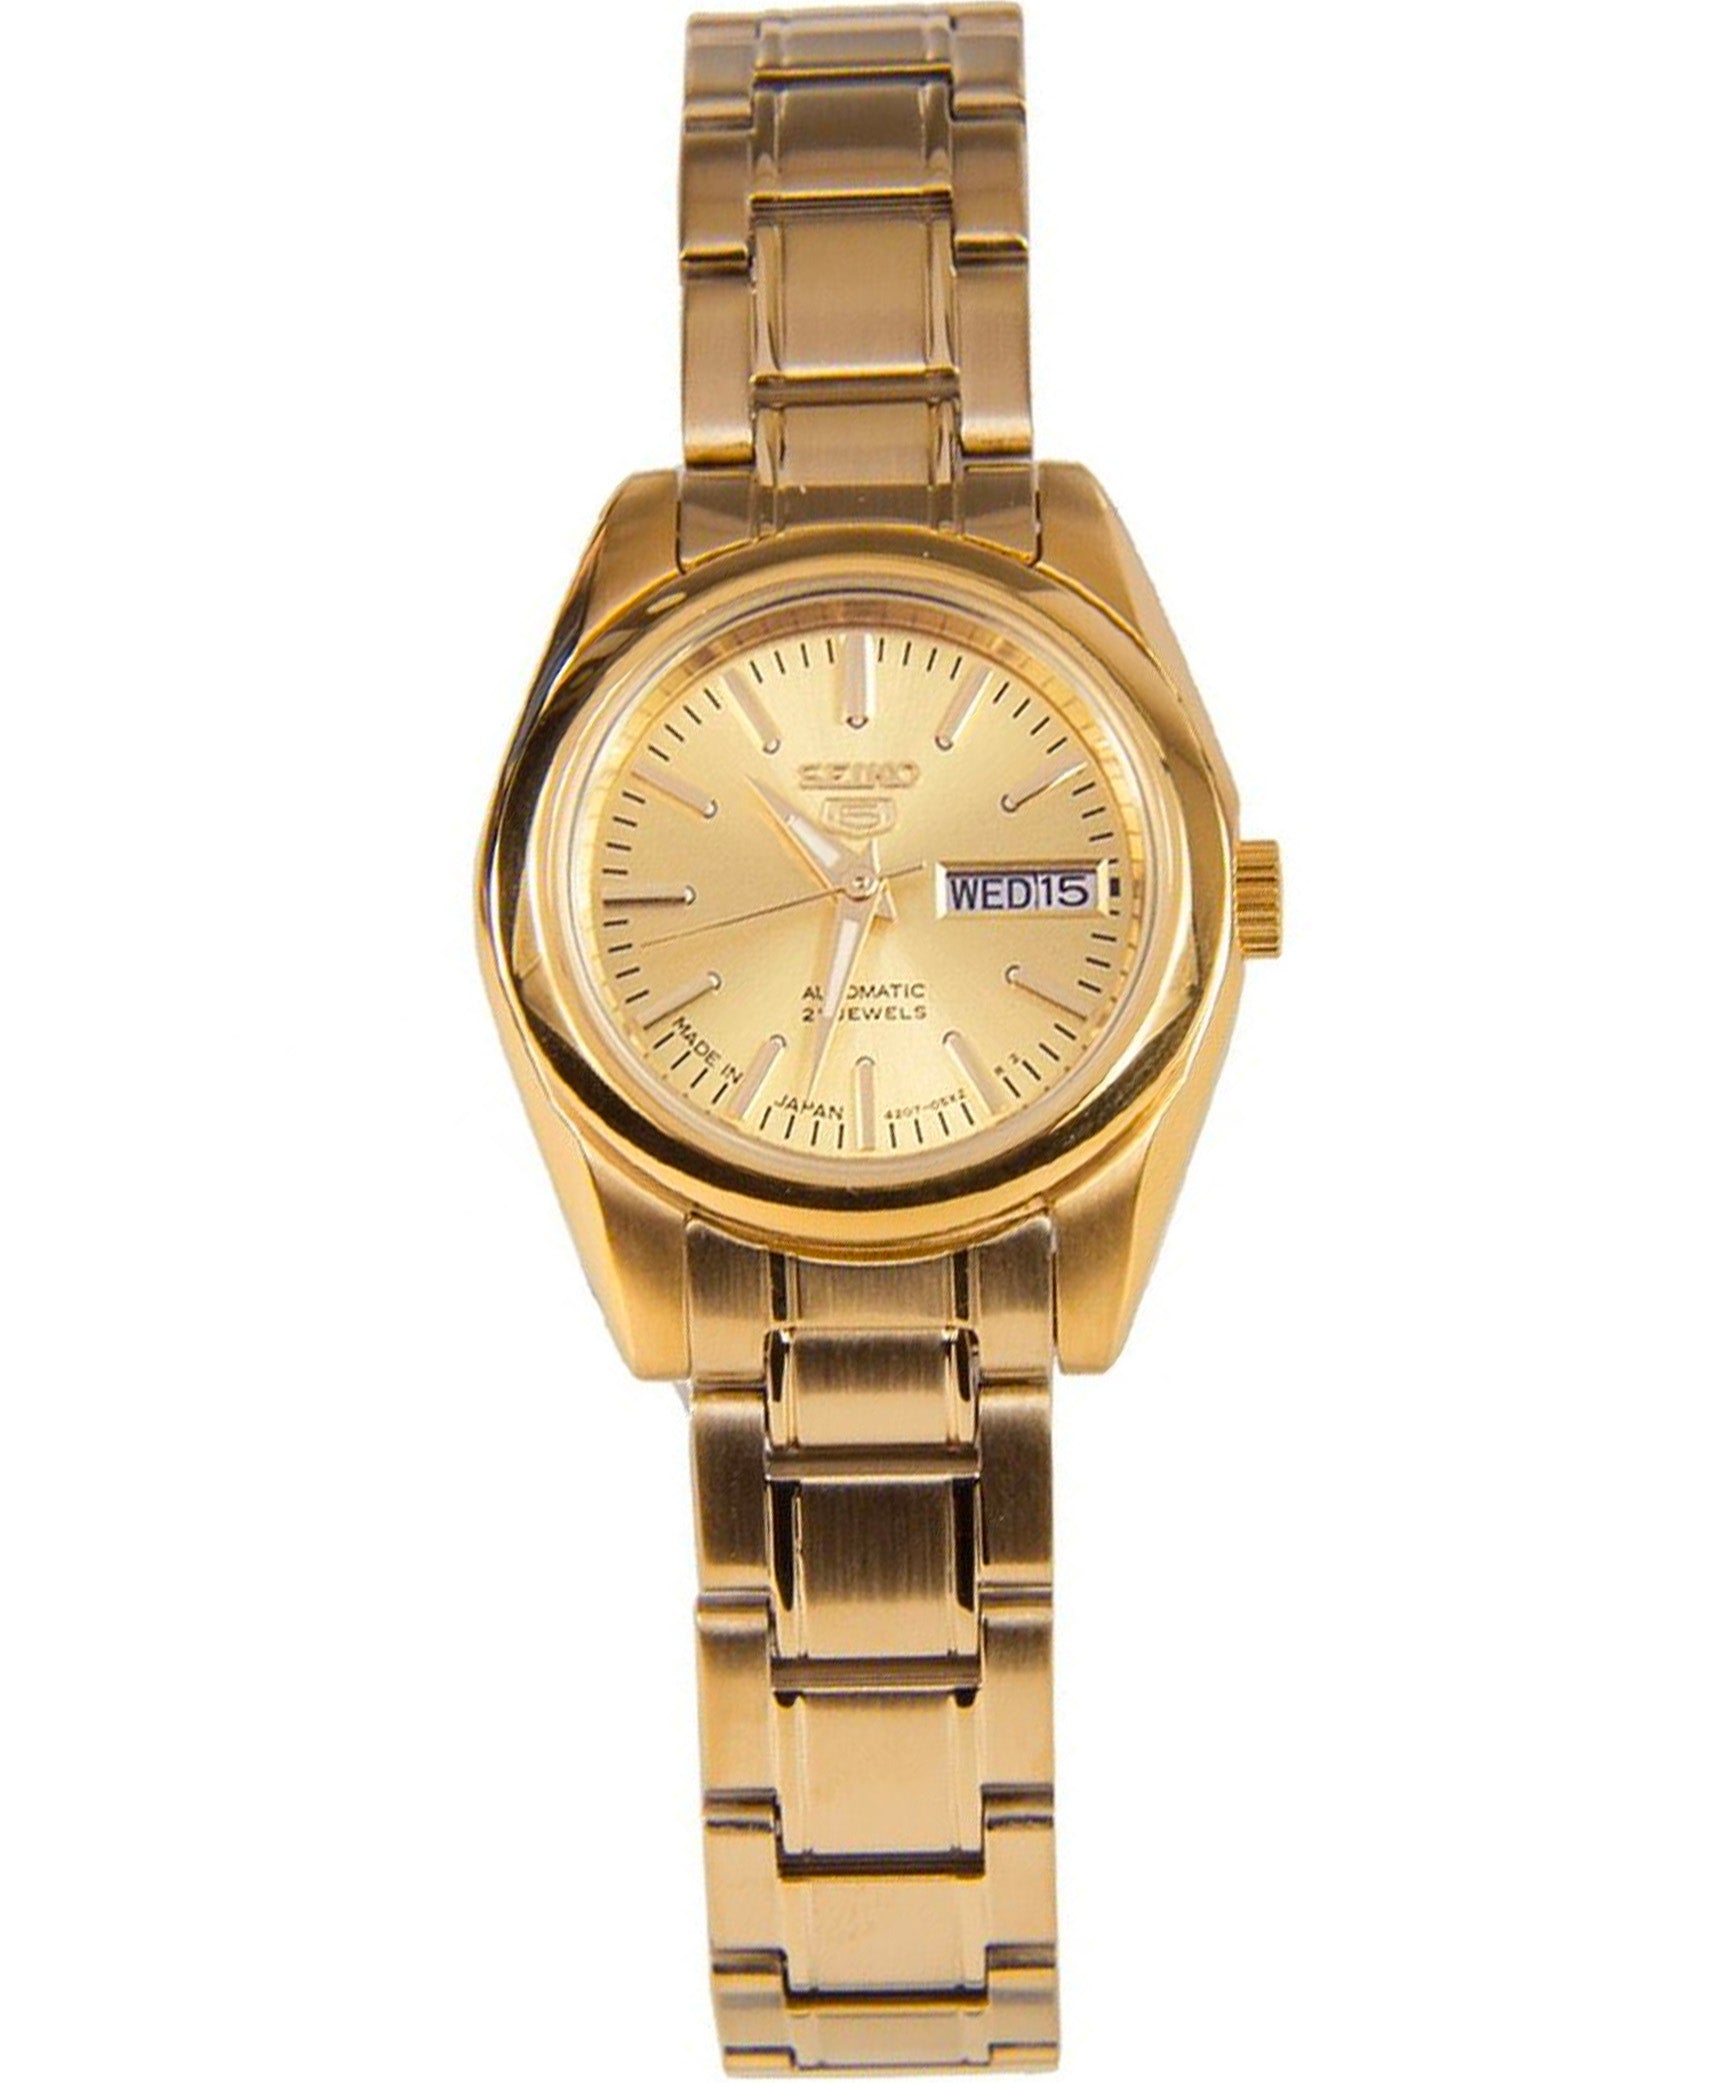 Seiko Women's Mechanical Watch Analog, Gold Dial Gold Stainless Band, SYMK20J